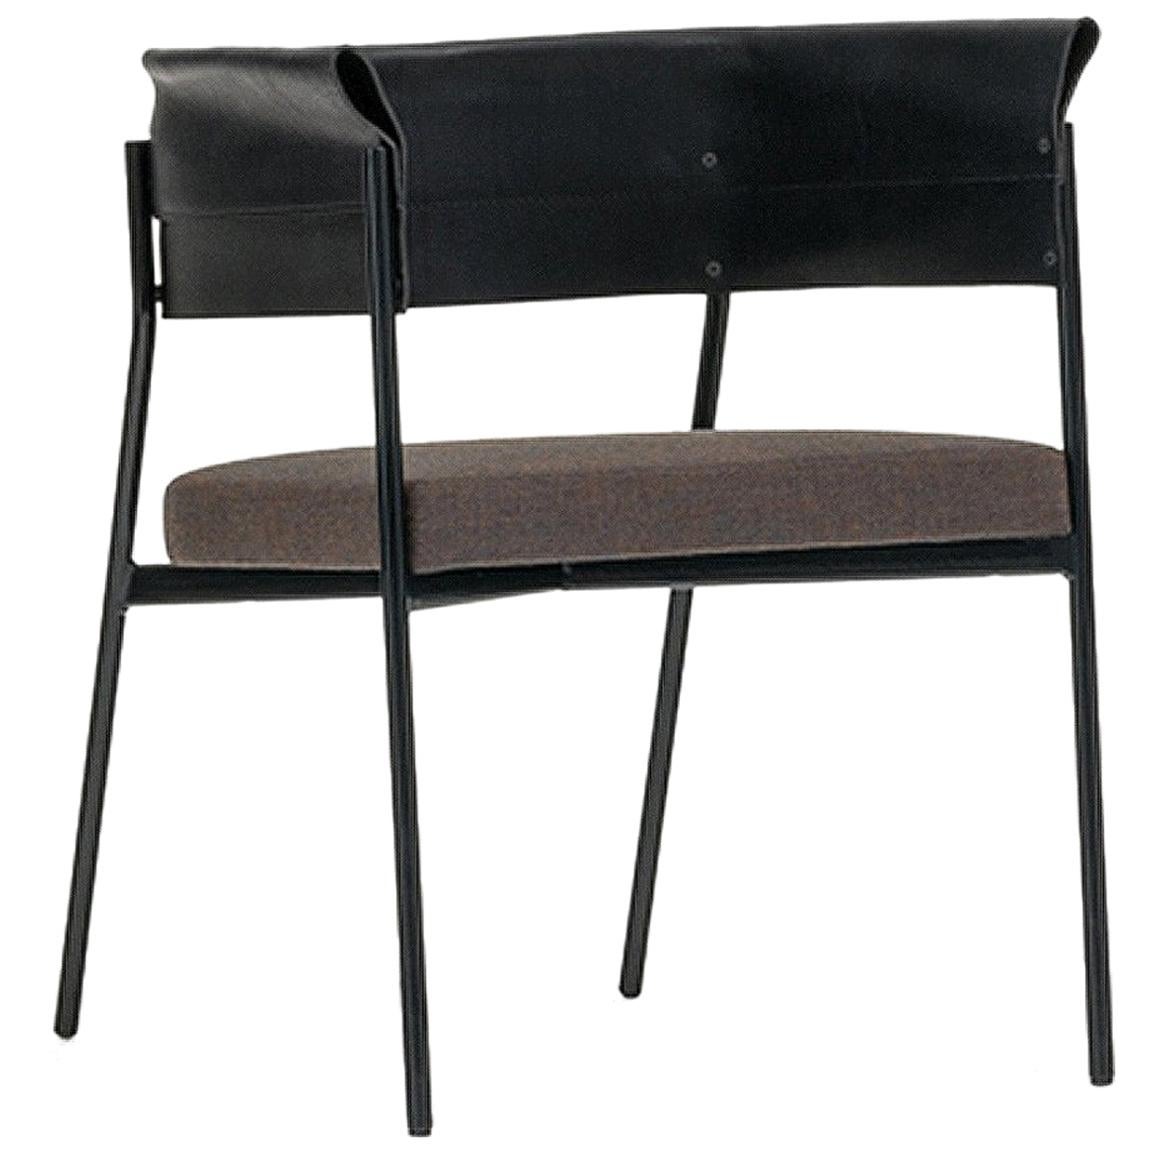 Contemporary Tailor Made Gomito Chair, Handcrafted Folded Leather Backrest